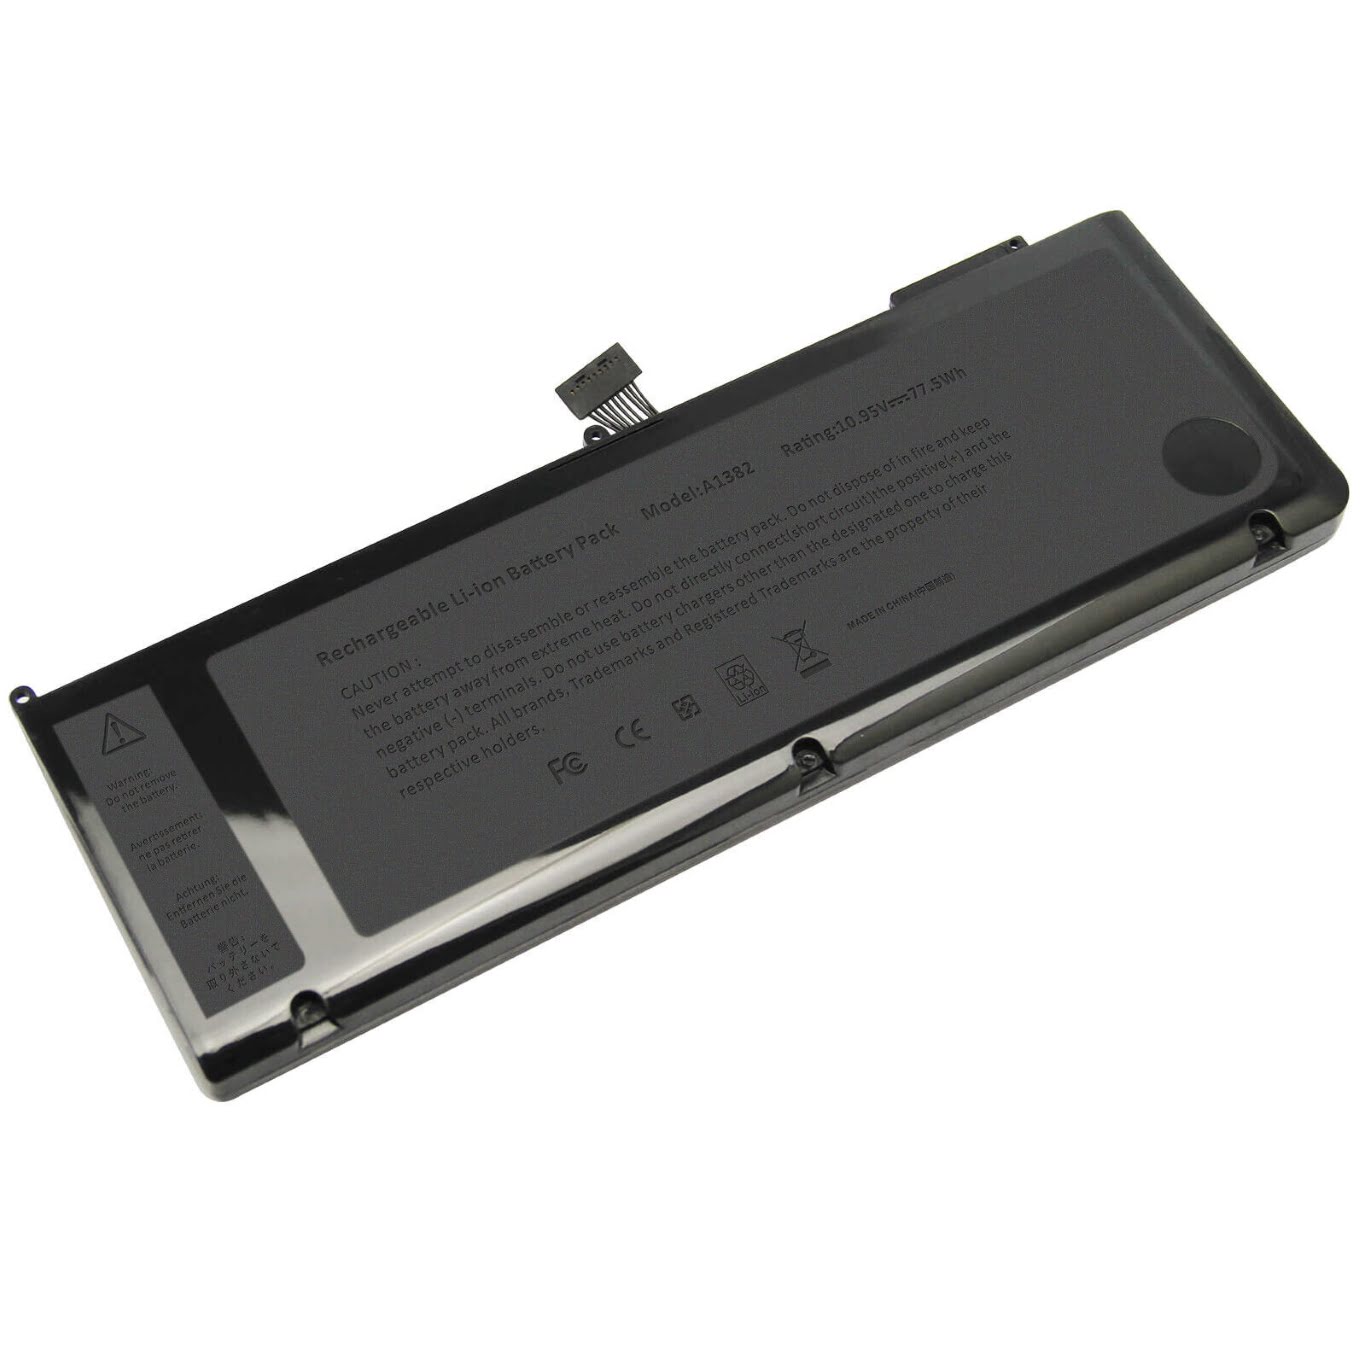 020-7134-A, 661-5844 replacement Laptop Battery for Apple MacBook Pro 15 4  MC721LL/A(Early 2011 Version), MacBook Pro 15.4  BTO/CTO(Late 2011 Version), 10.95 V, 6 cells, 77.5wh